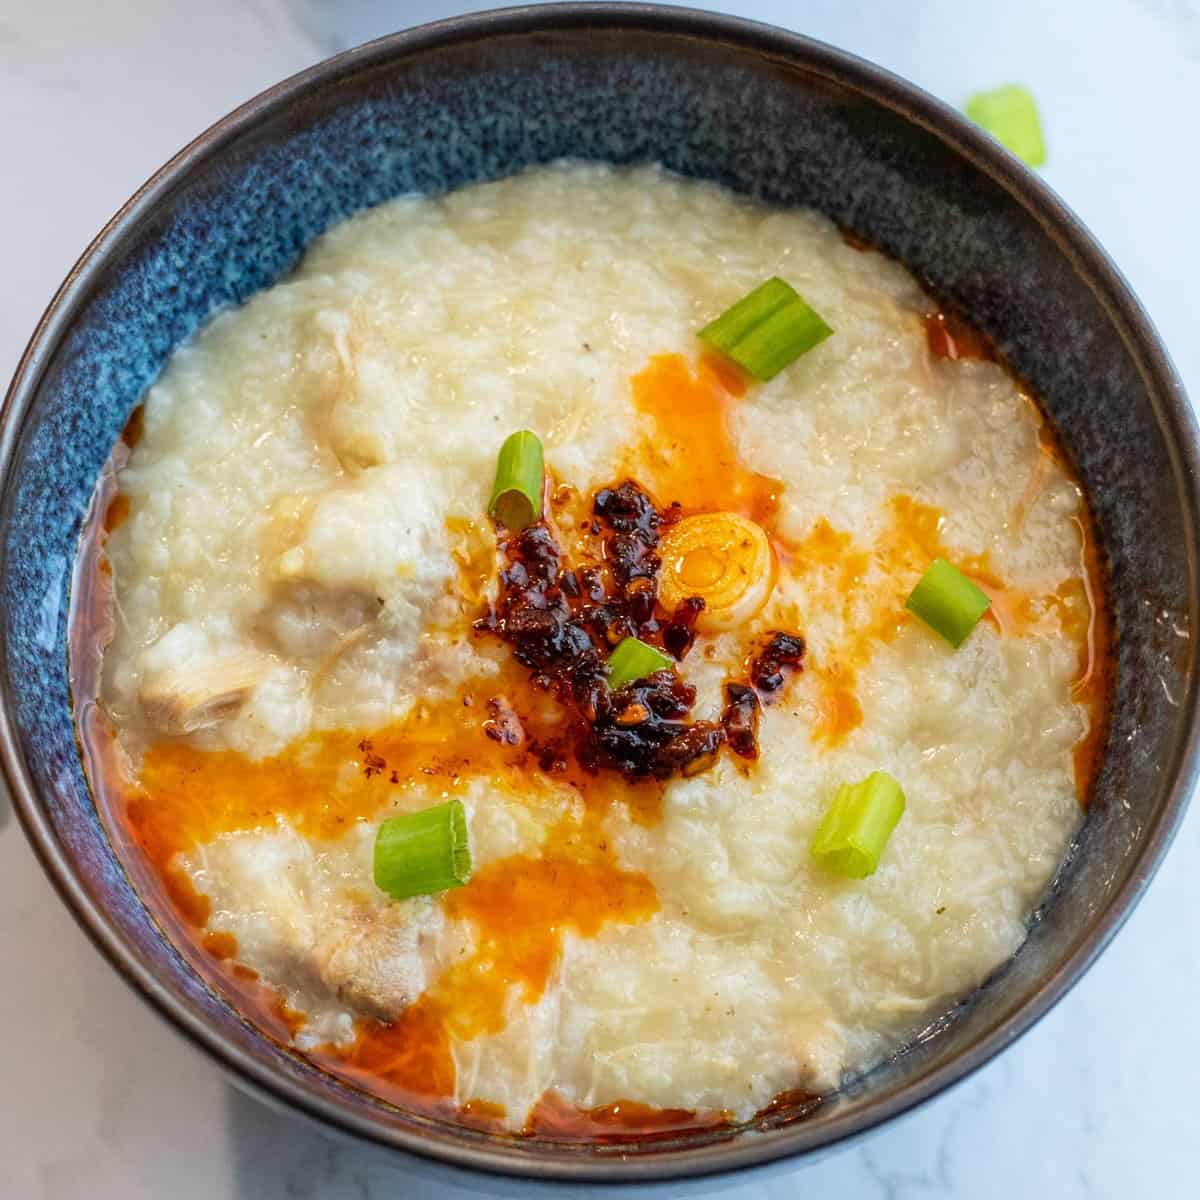 chicken congee served in a bowl with green onions and chili oil on top.